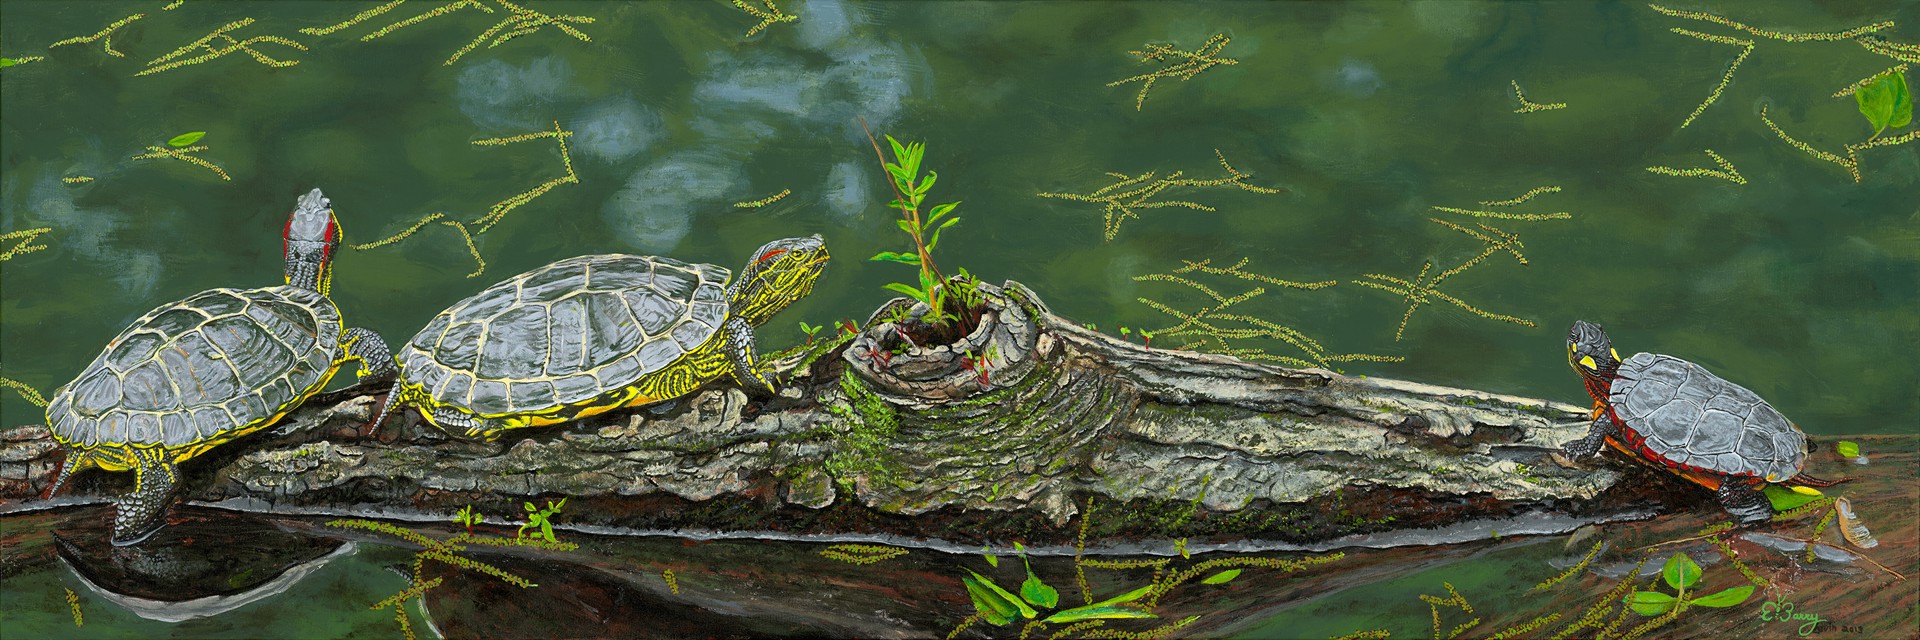 Terrapin Log by Barry Levin